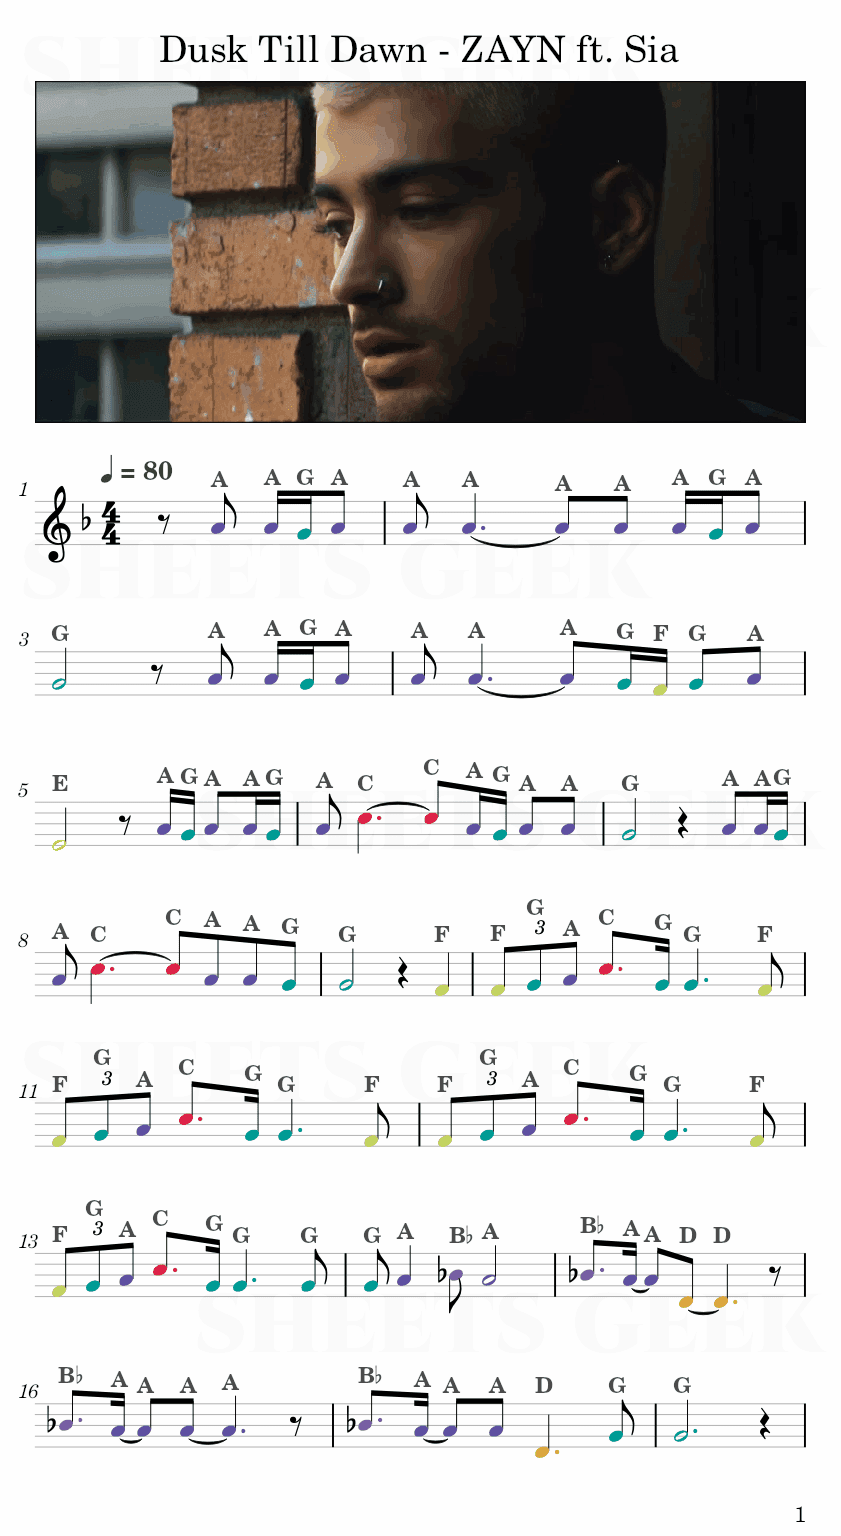 Dusk Till Dawn - ZAYN ft. Sia Easy Sheet Music Free for piano, keyboard, flute, violin, sax, cello page 1